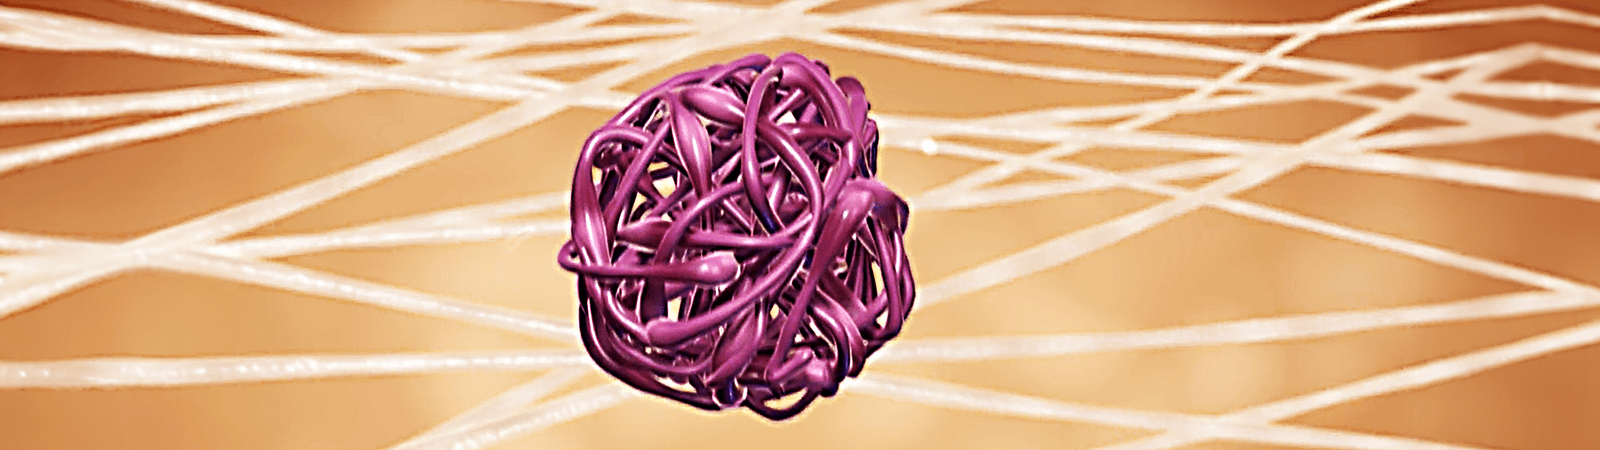 Image of strands combined into one ball 